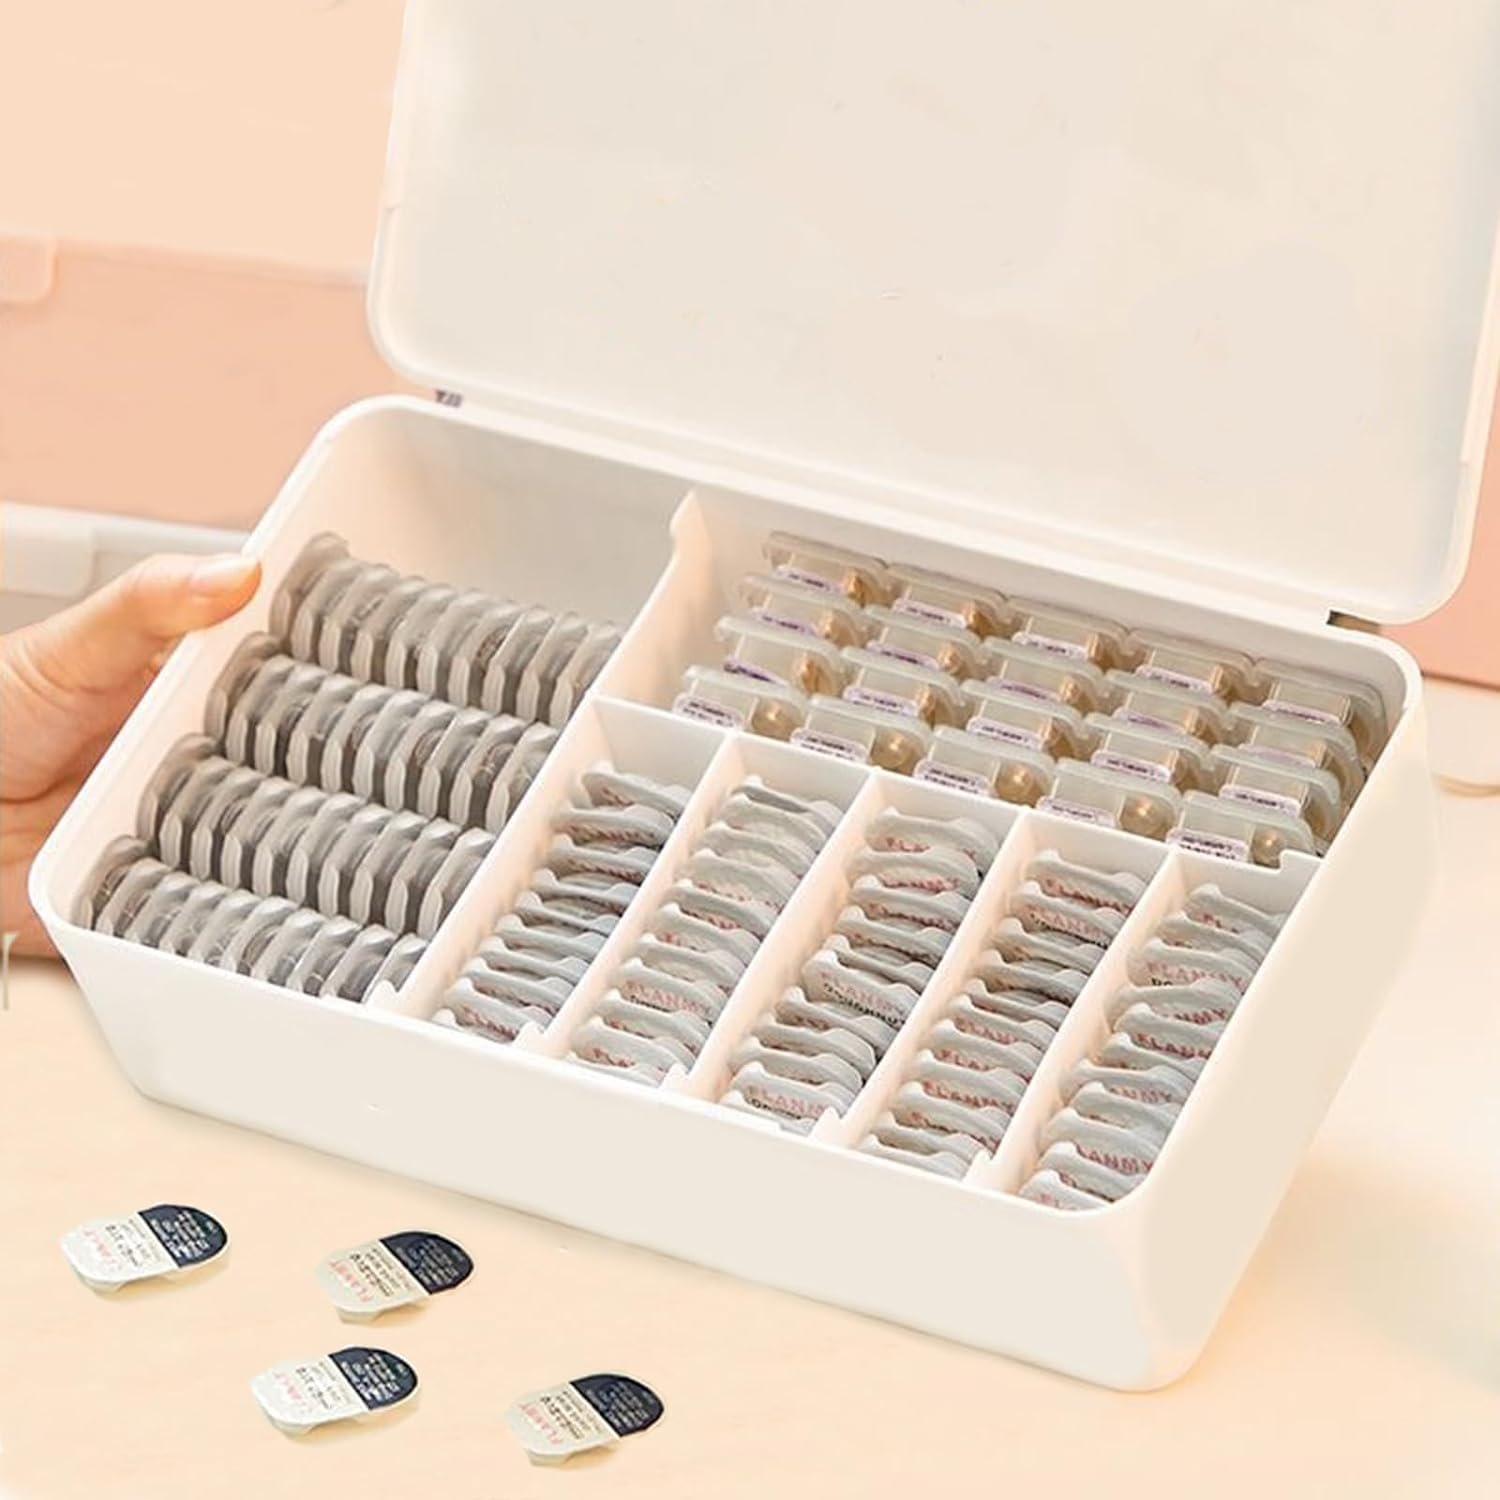 Top 3 Daily Contact Lens Organizers: A Detailed Review